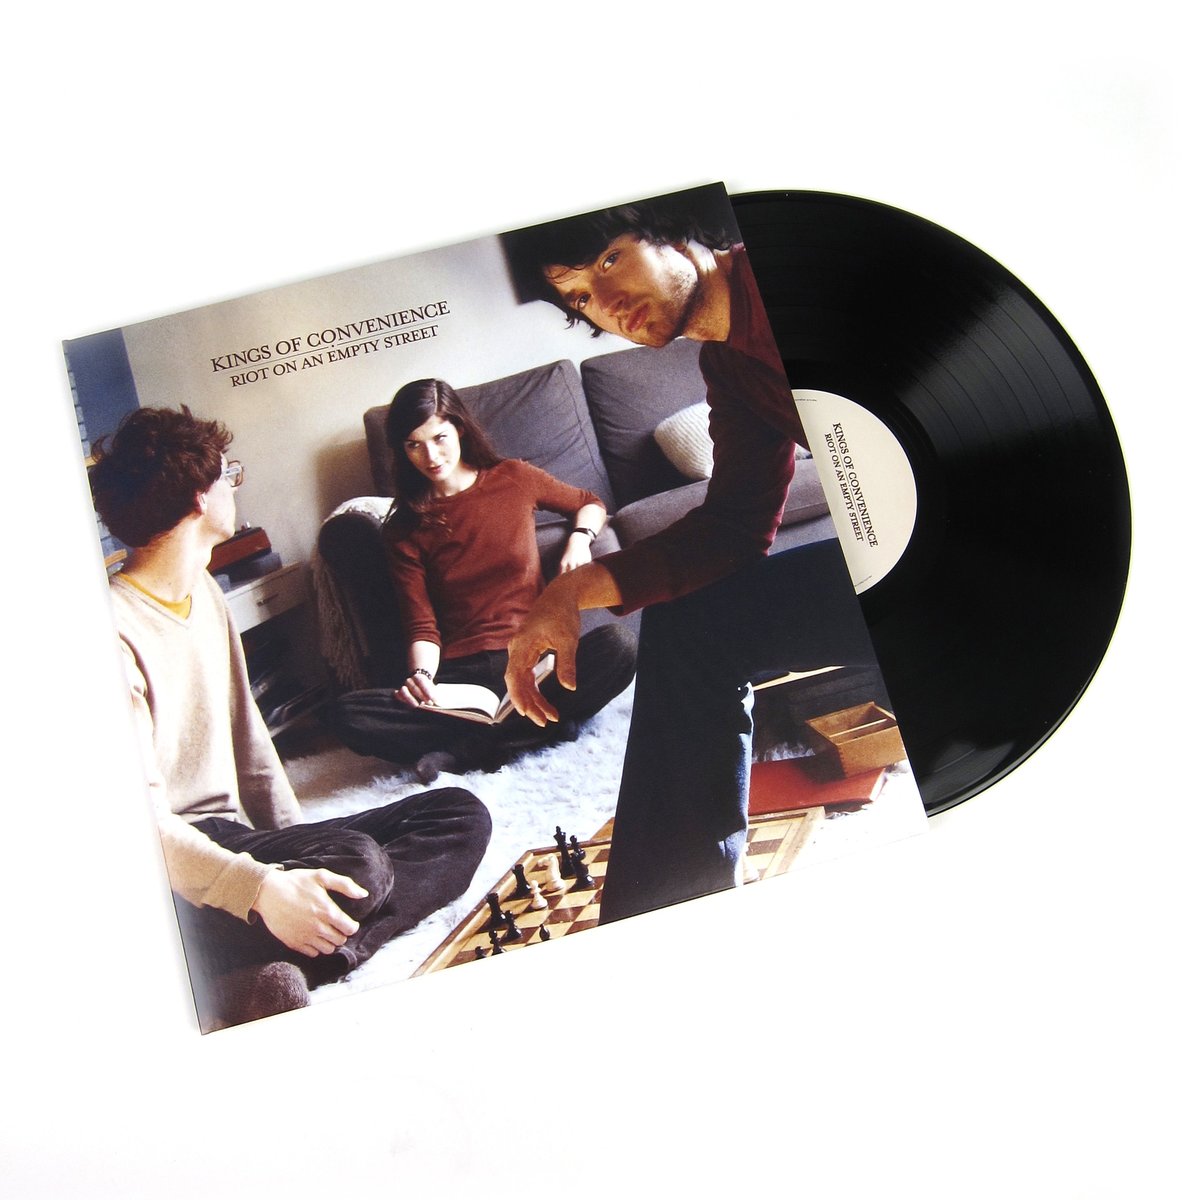 CD Shop - KINGS OF CONVENIENCE RIOT ON AN EMPTY STREET